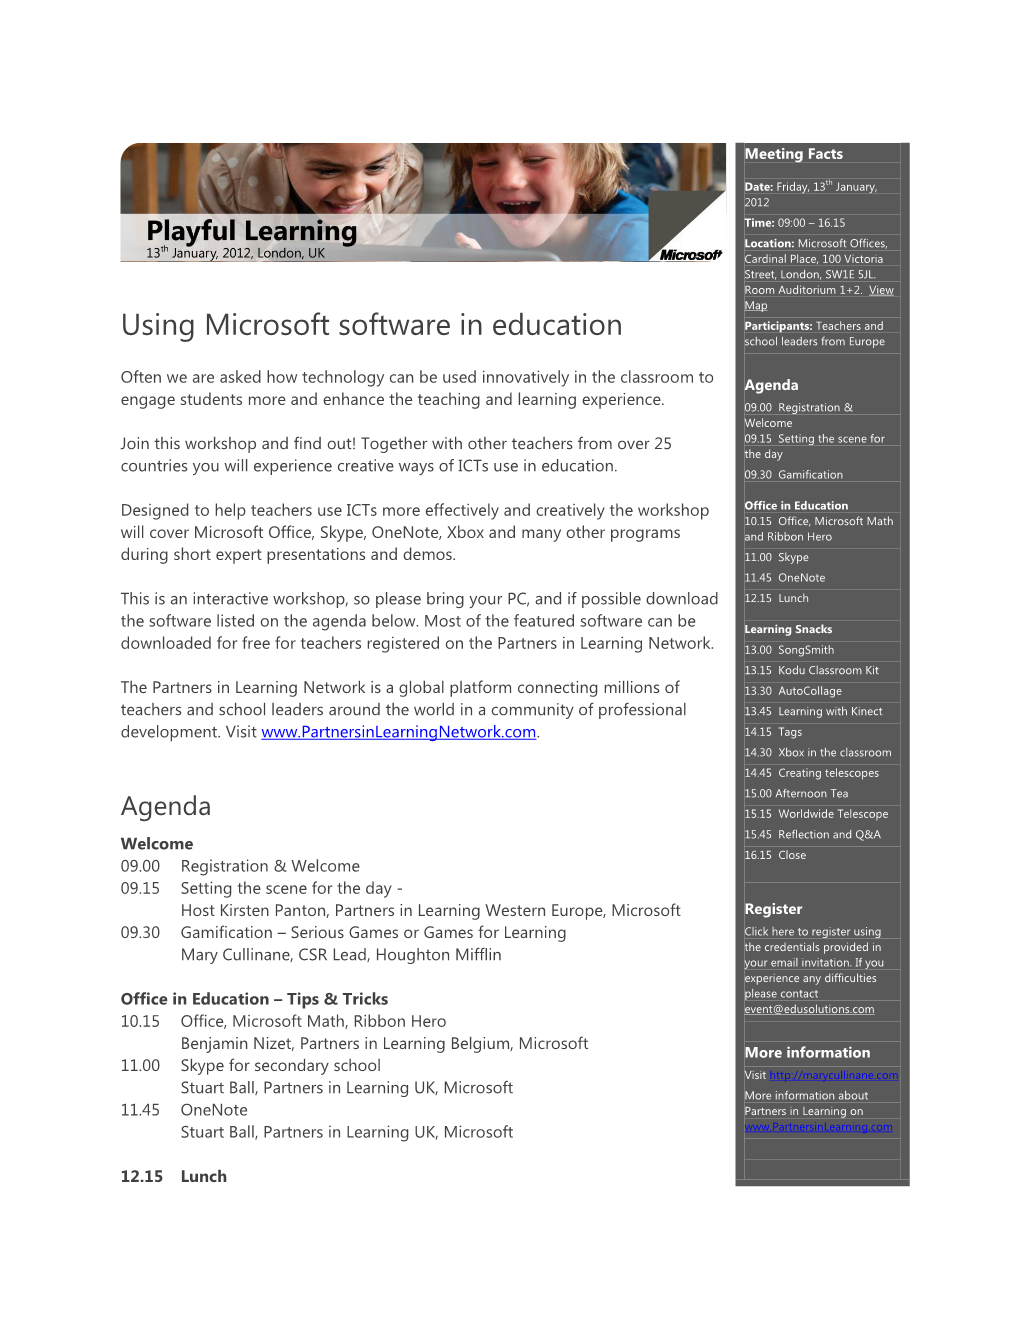 Using Microsoft Software in Education Participants: Teachers and School Leaders from Europe